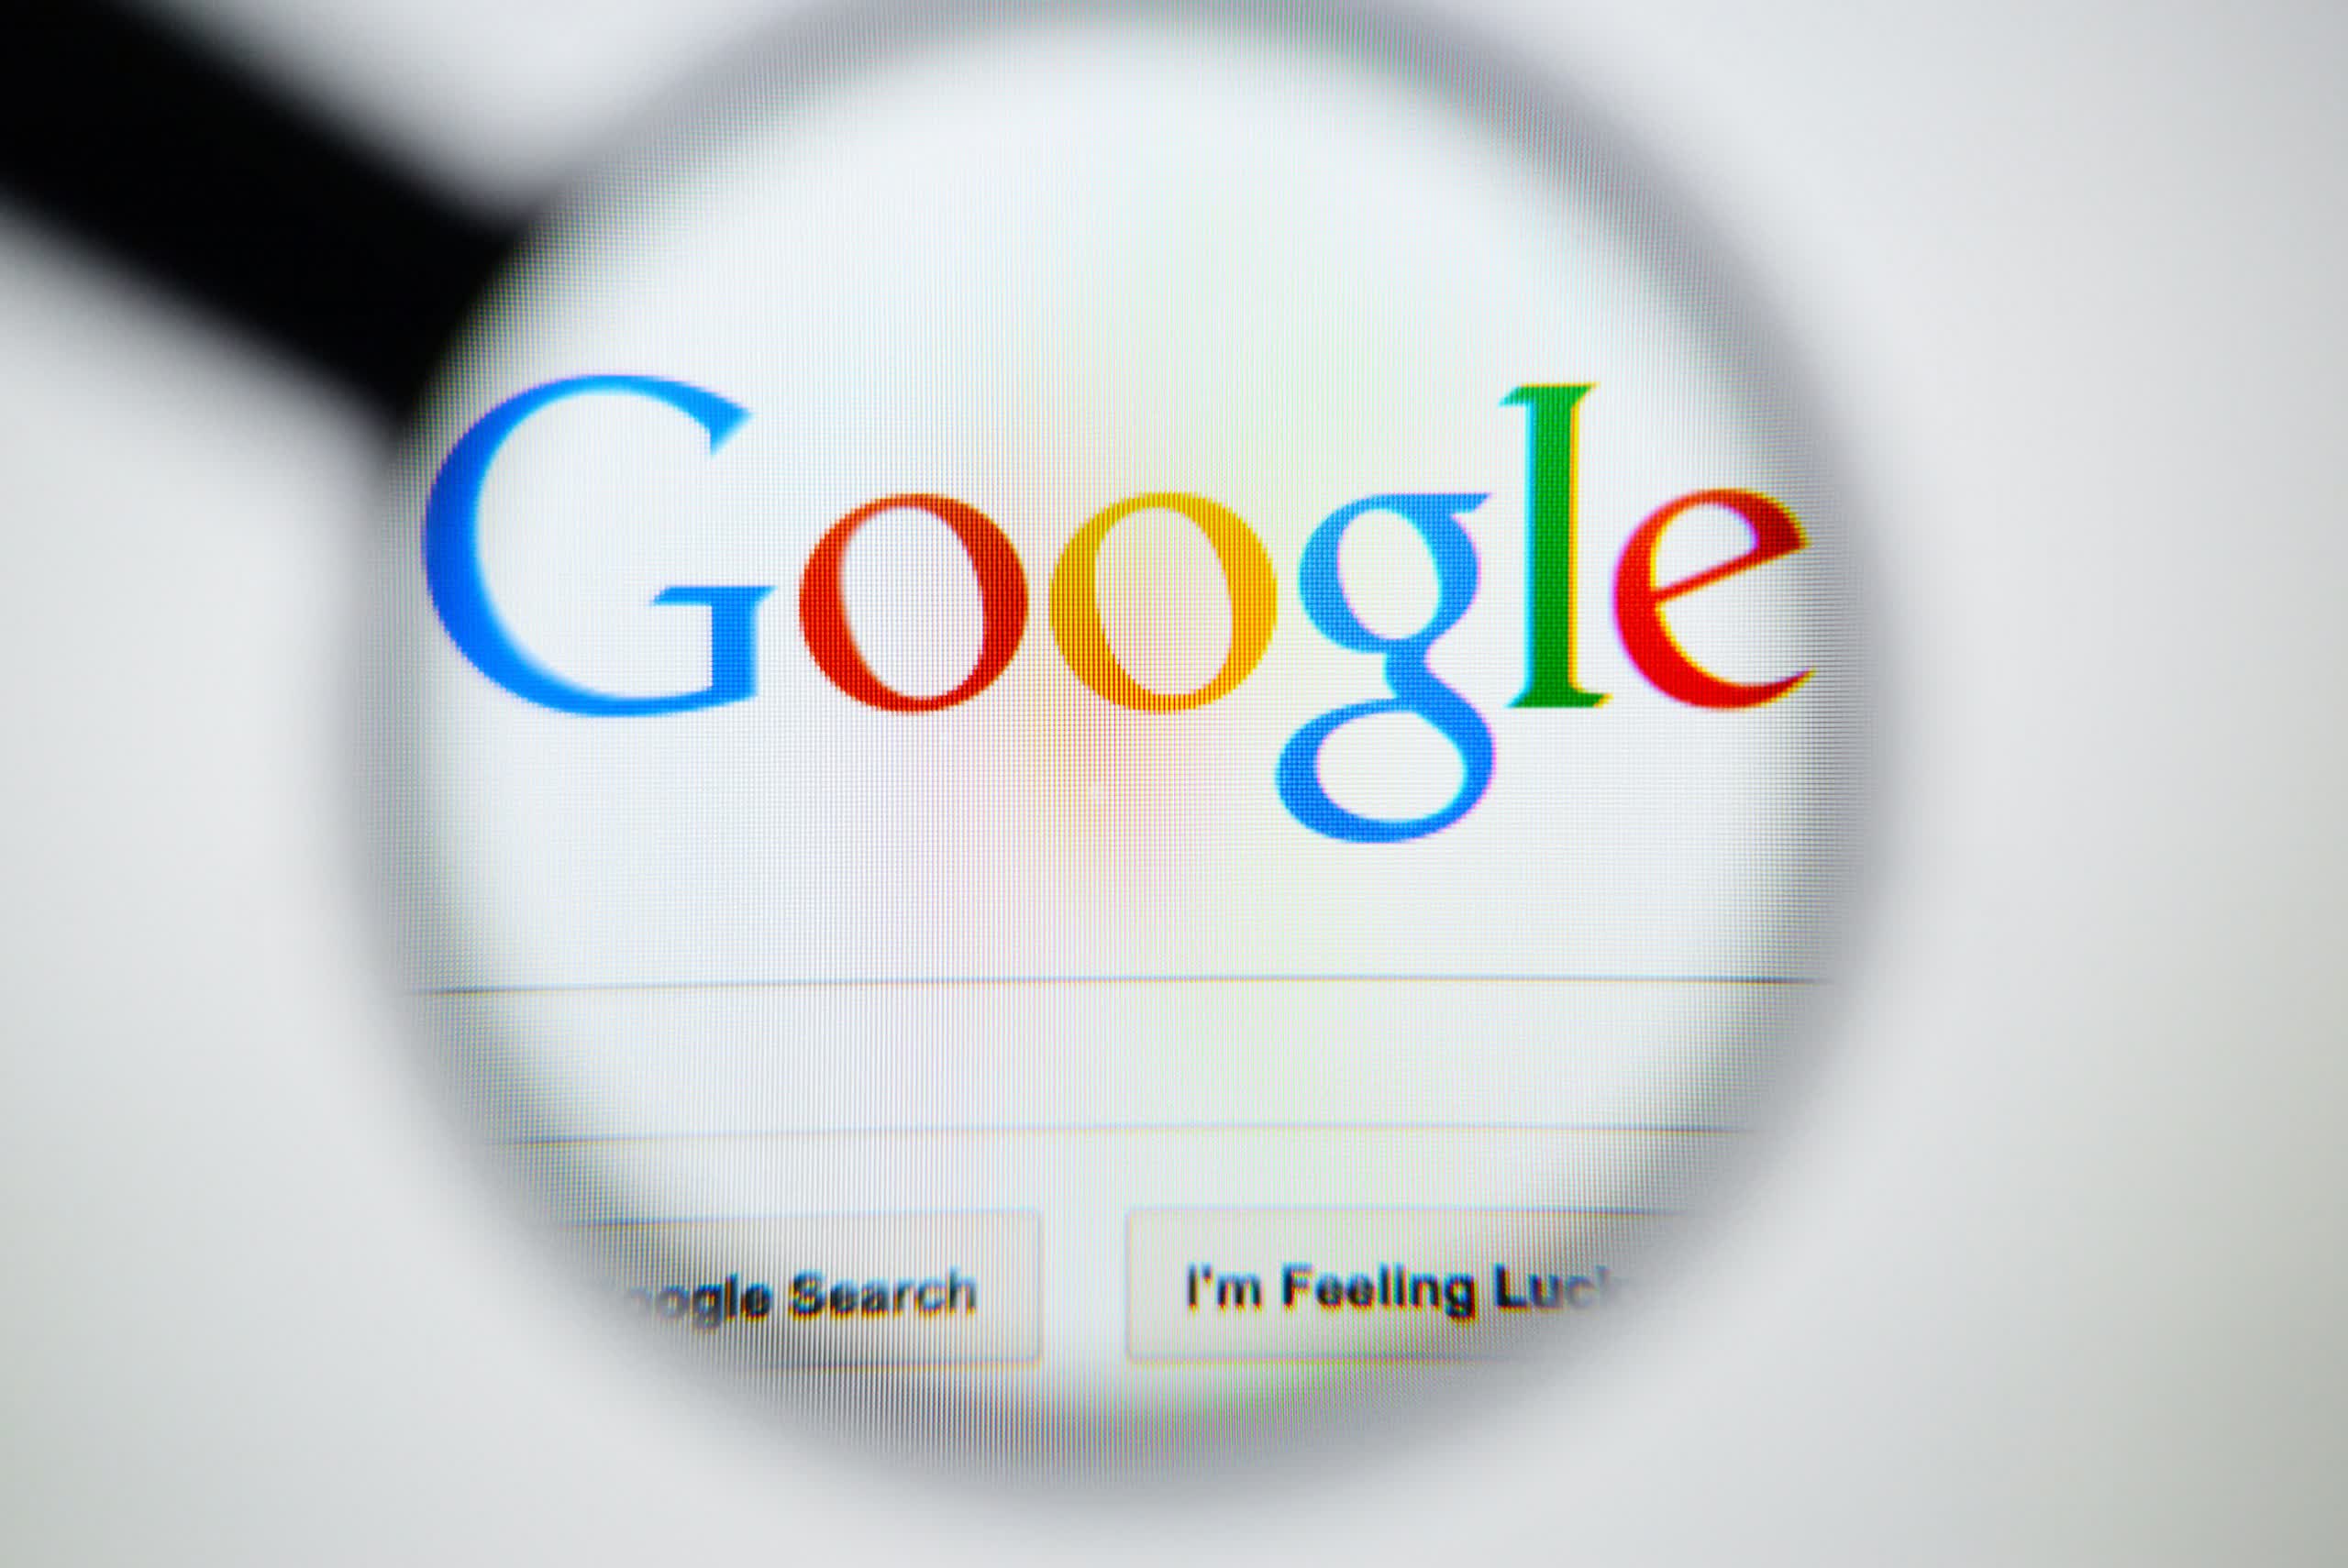 Google will begin showing you optional website descriptions in Search results